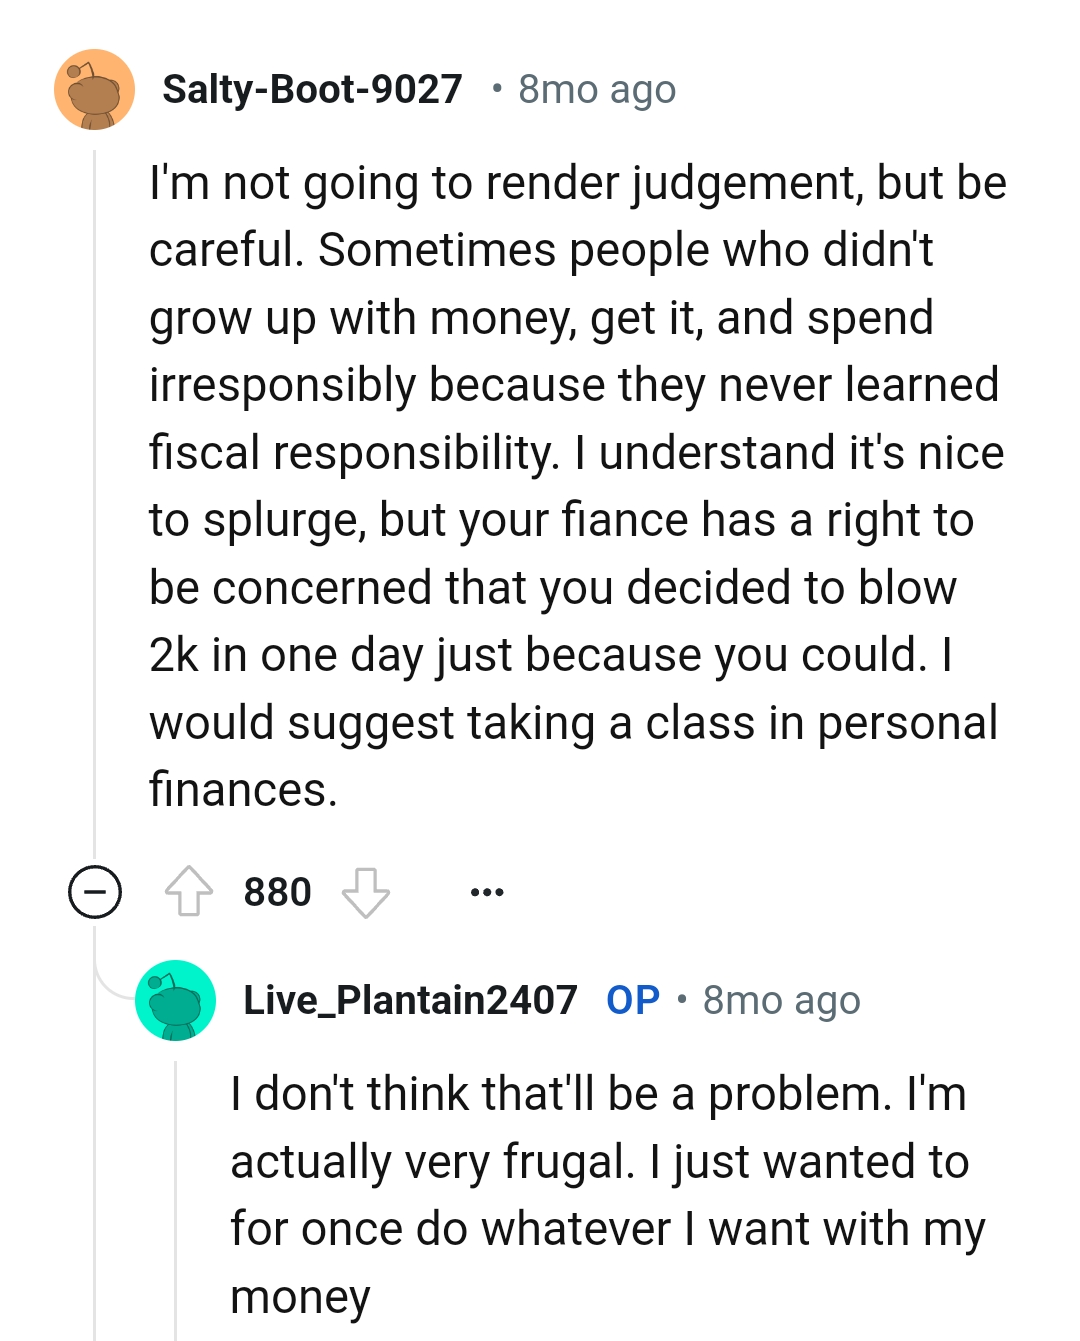 OP's fiance has a right to be concerned that she blew so much money